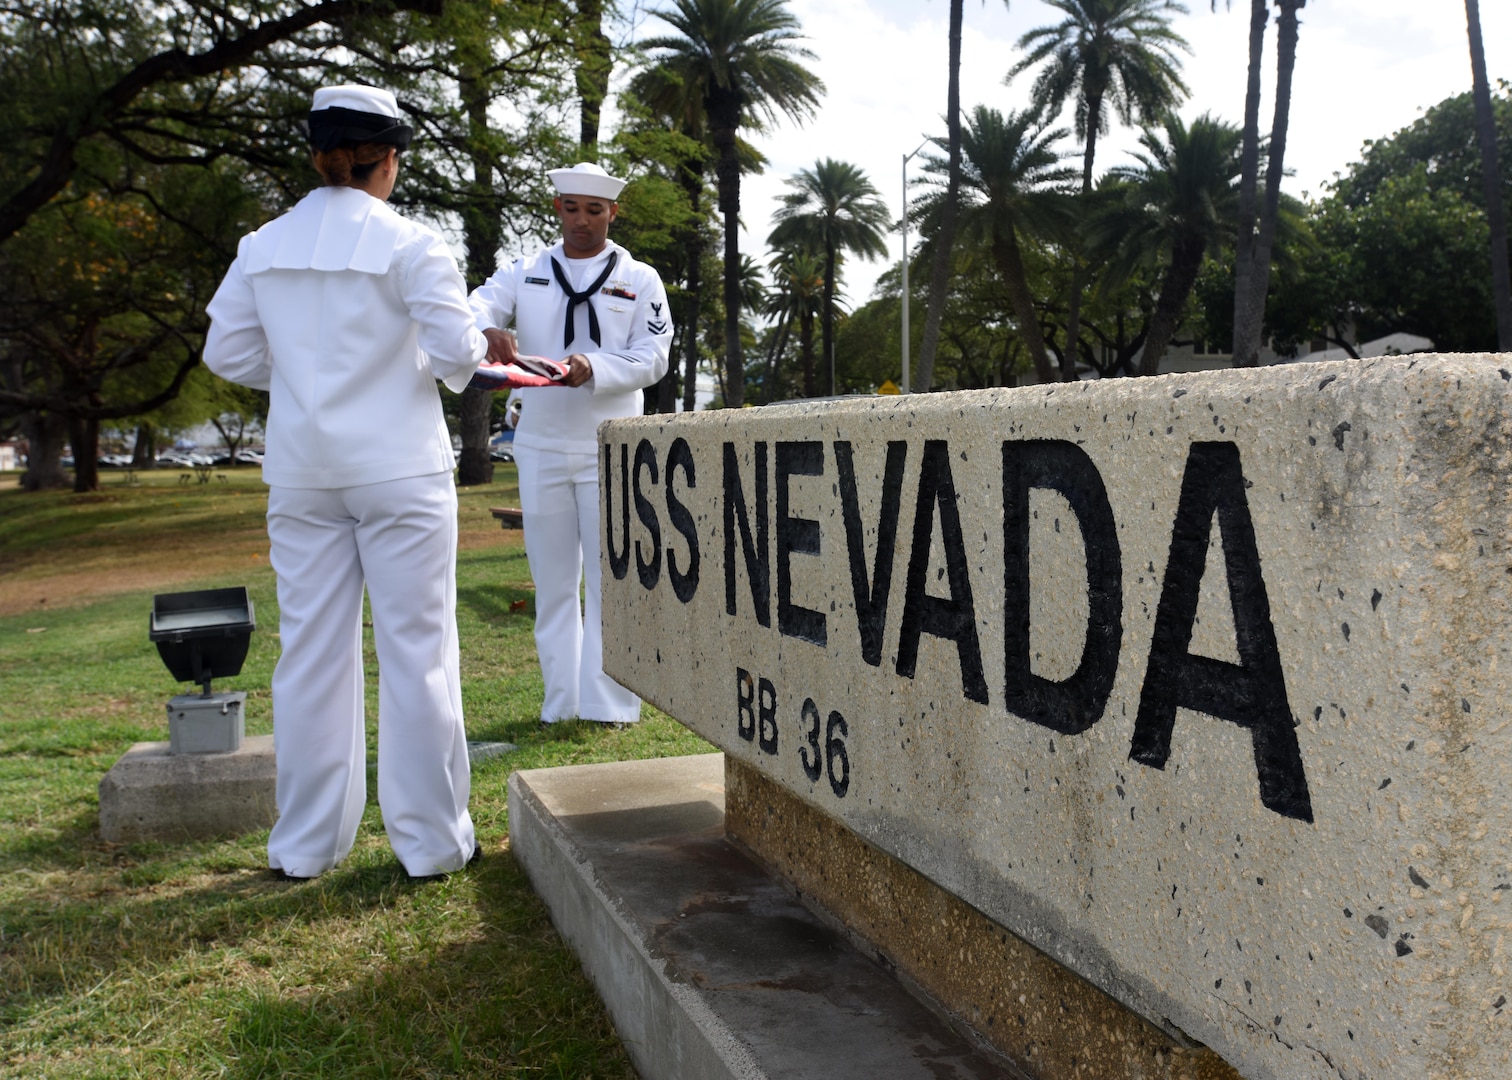 160311-N-QL961-111 PEARL HARBOR (Mar. 11, 2016) Operations Specialist 3rd Class Jasmine Bencid, left, and Culinary Specialist 2nd Class David Johnson, both members of the Joint Base Pearl Harbor-Hickam (JBPHH) color guard, fold the national ensign during a commemoration ceremony for the USS Nevada (BB 36) 100th anniversary of its commissioning at the USS Nevada memorial on JBPHH. The ceremony was conducted at the Nevada memorial simultaneously as a similar ceremony was being held in Carson City, Nevada. (U.S. Navy photo by Mass Communication Specialist 1st Class Phillip Pavlovich/Released)